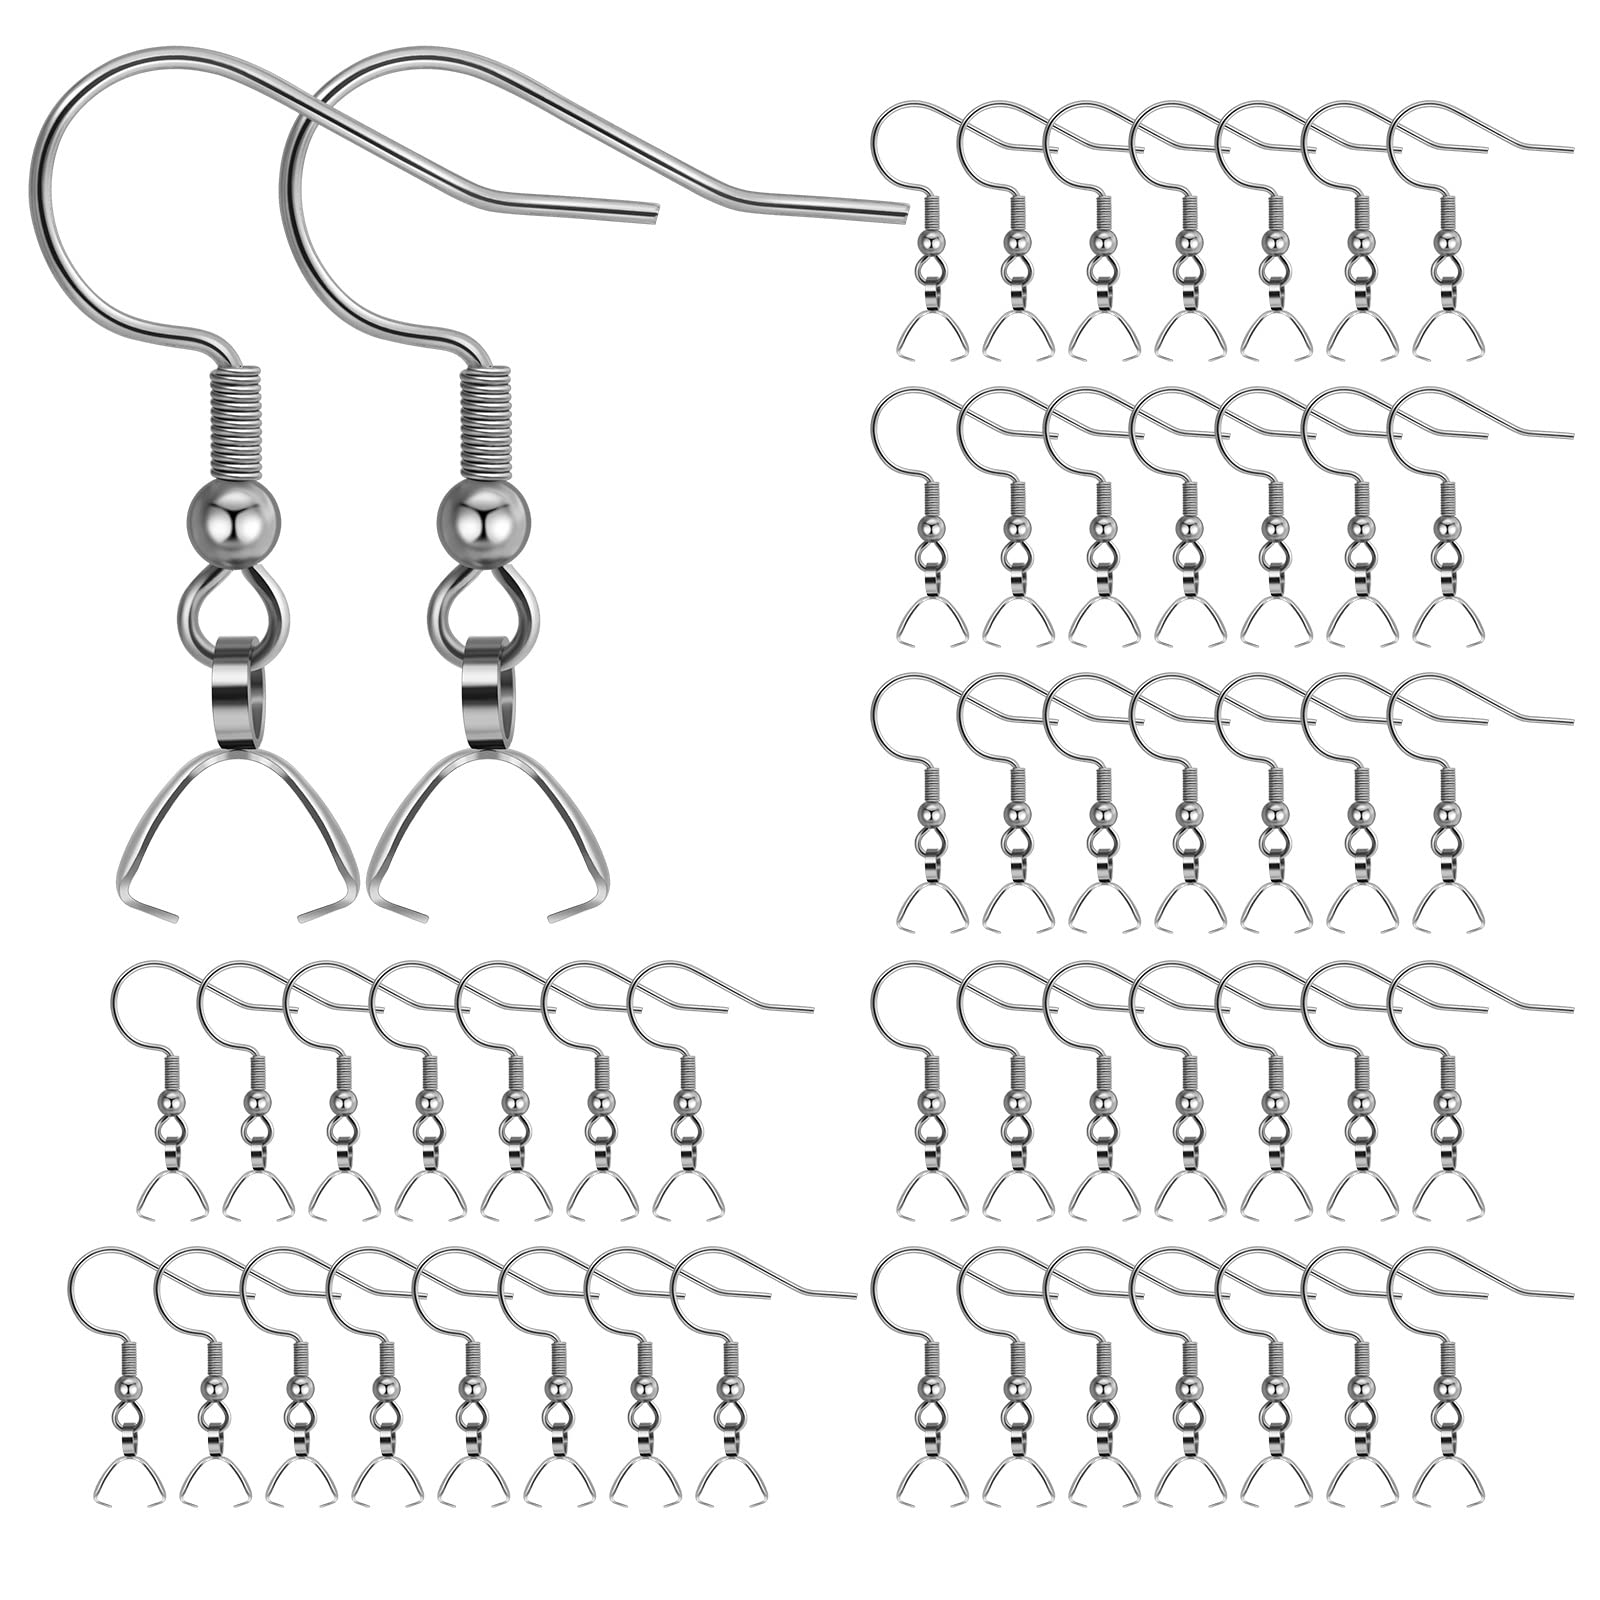 Earring Hooks 50PCS/25Pairs, Stainless Steel Ear Wires Fish Hooks